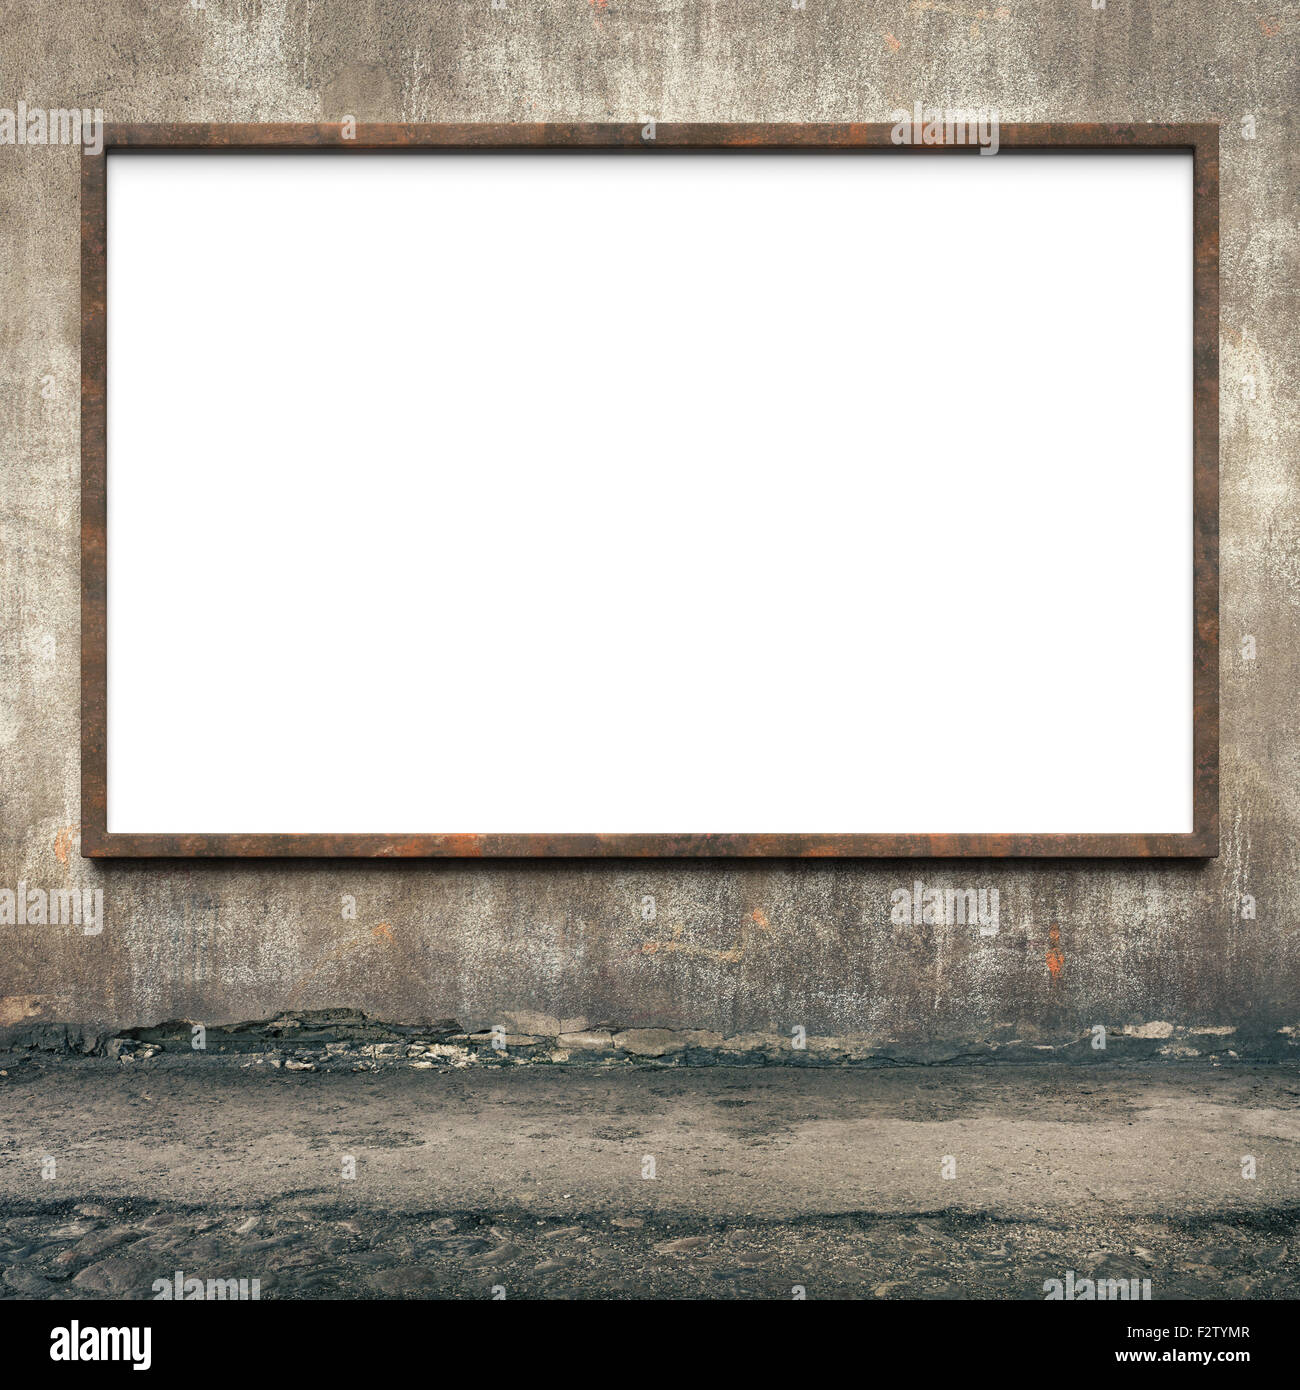 Blank advertising billboard with rusty frame on a dirty grunge wall. Stock Photo